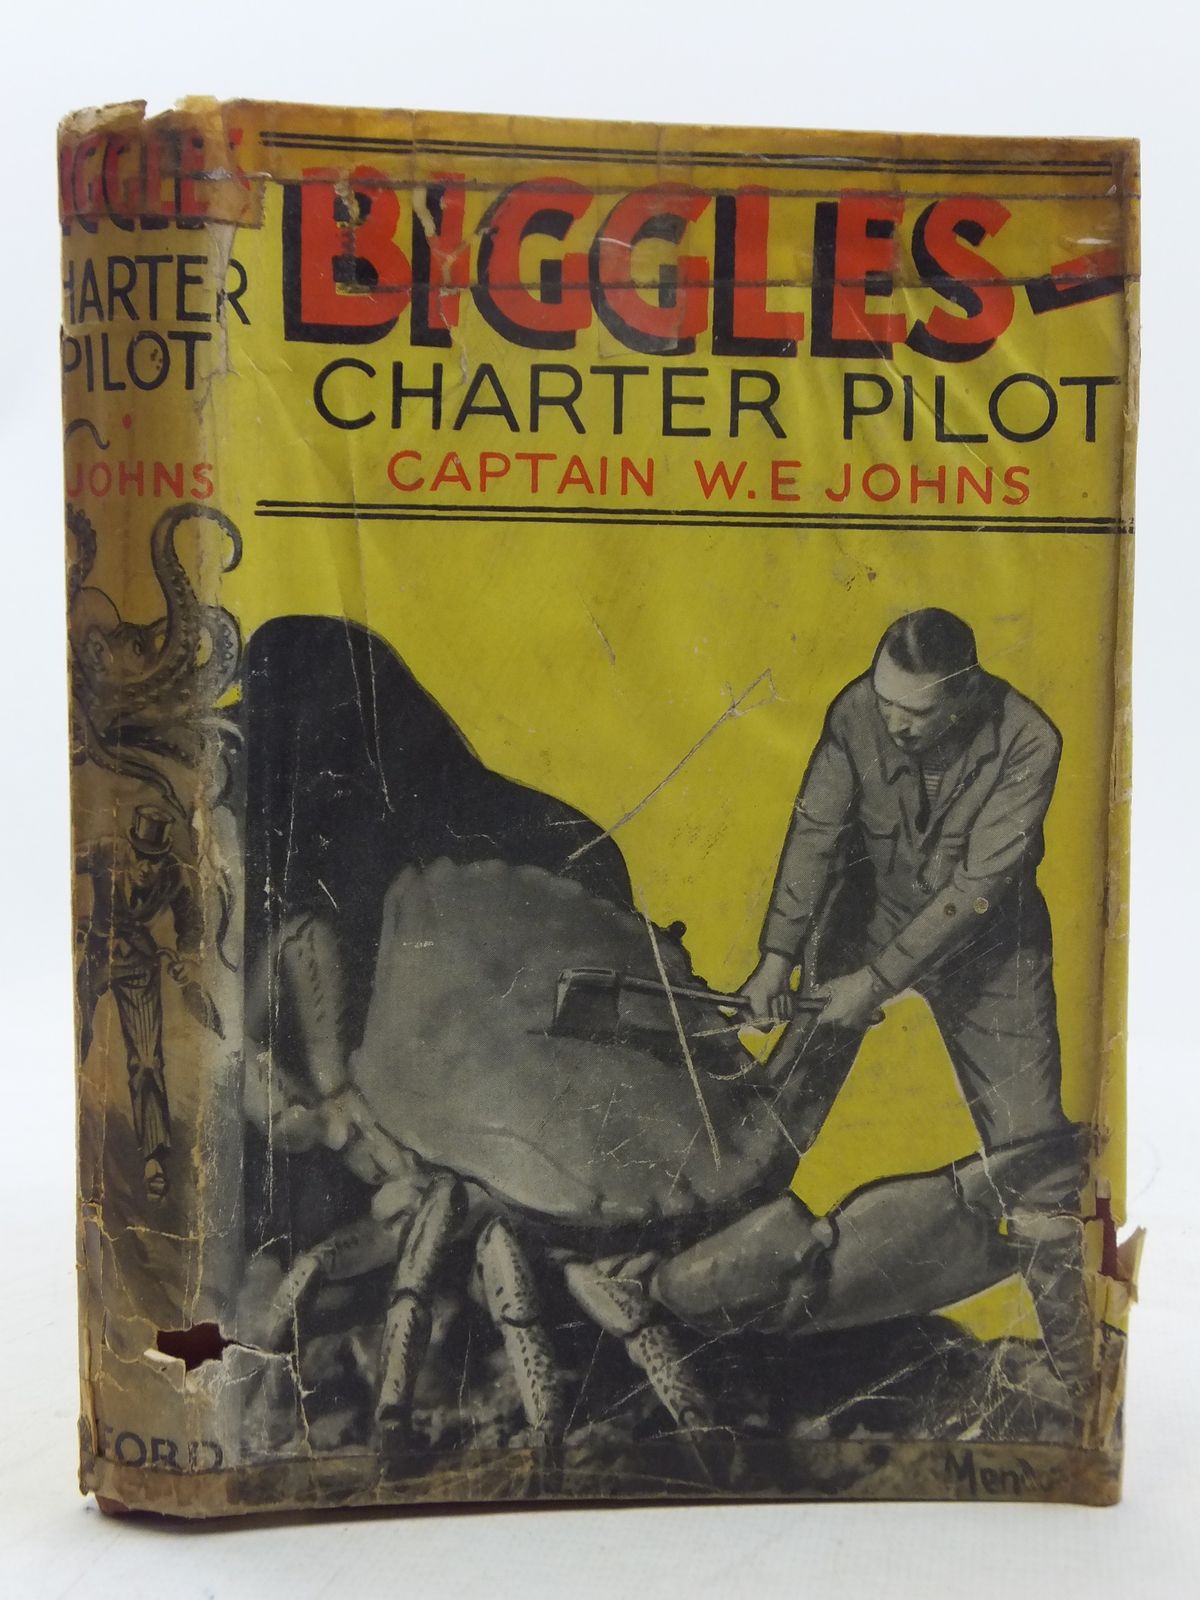 Cover of BIGGLES CHARTER PILOT by W.E. Johns